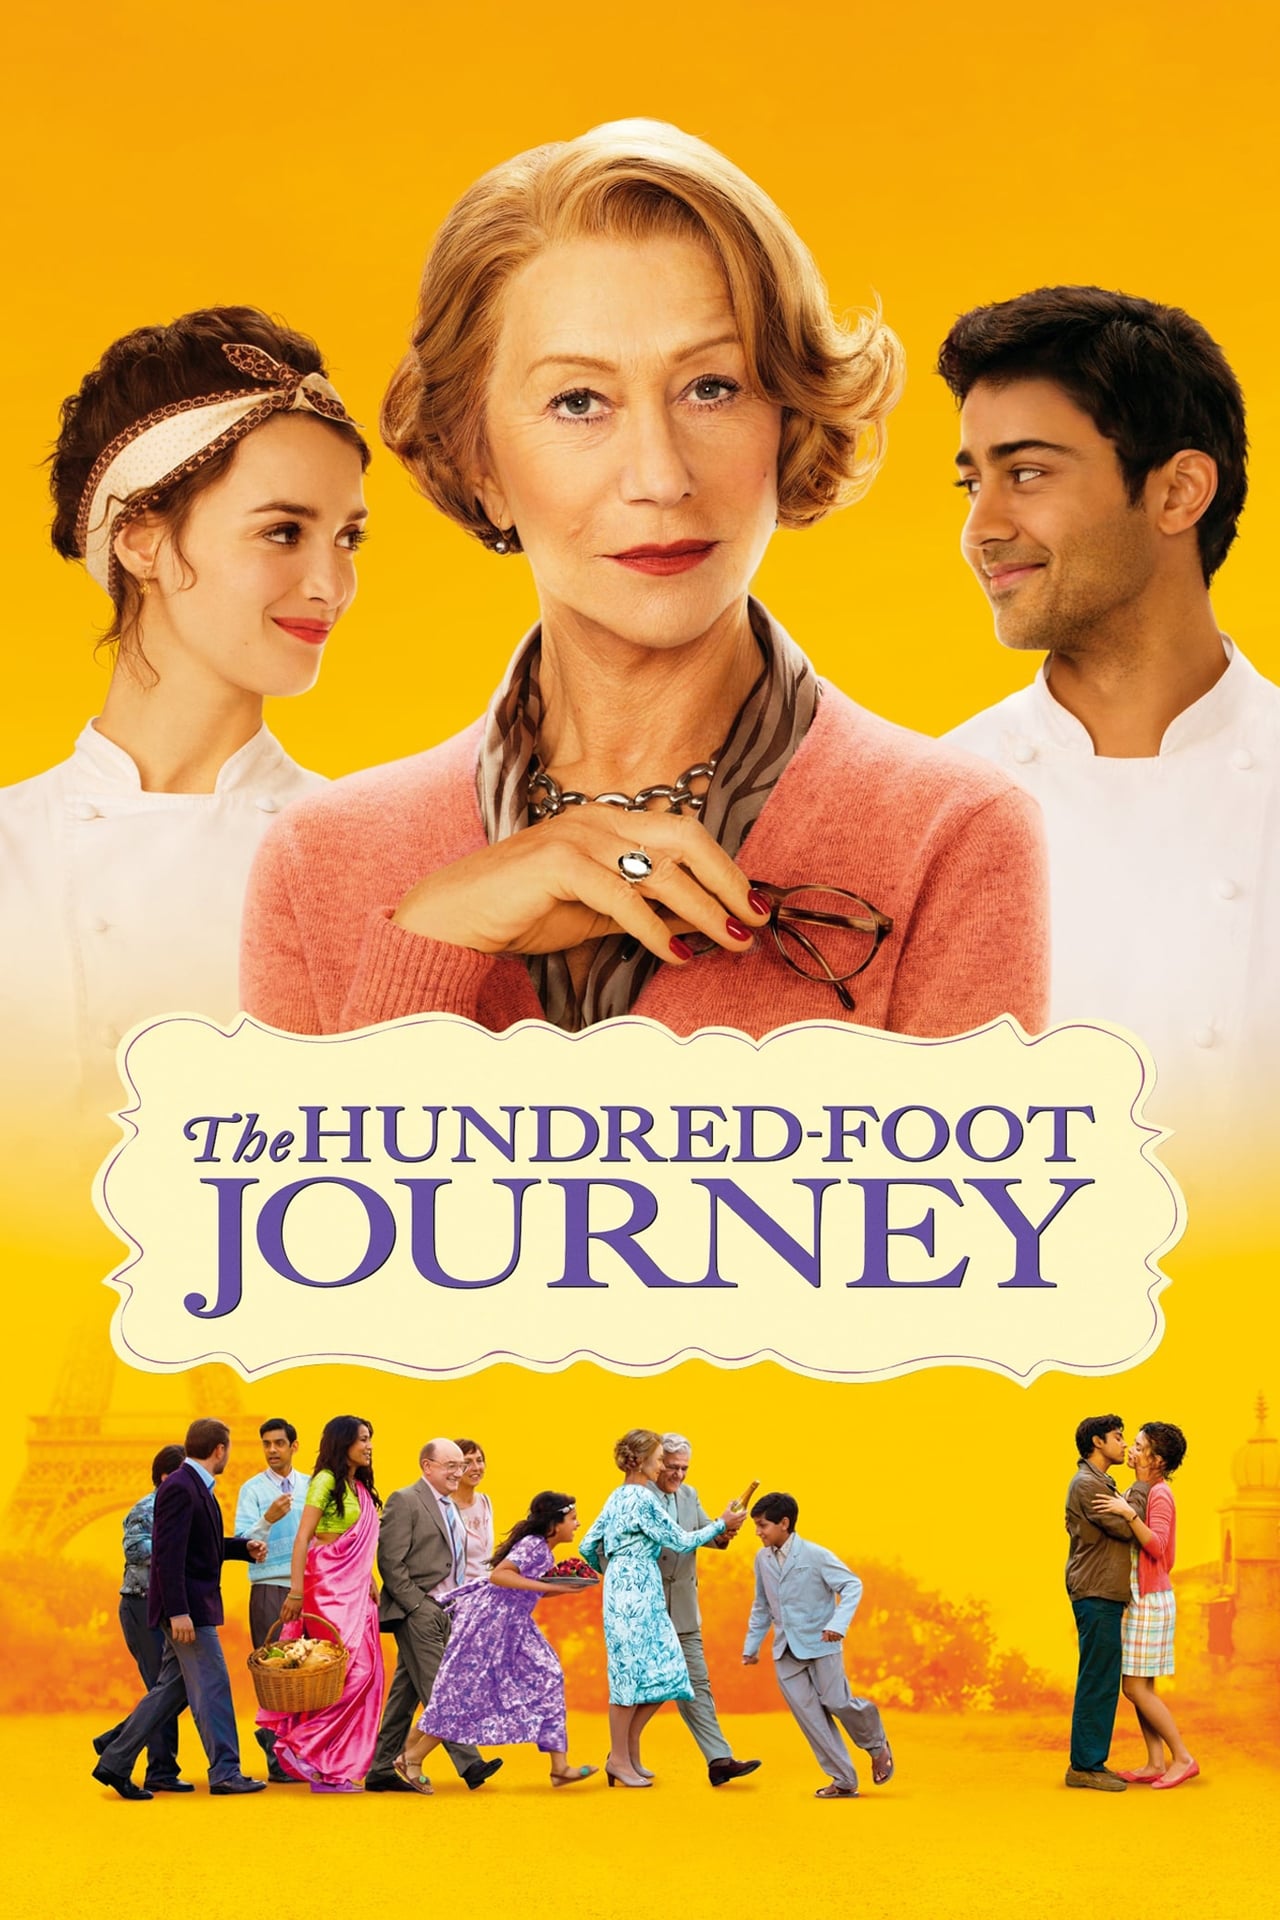 100 foot journey review